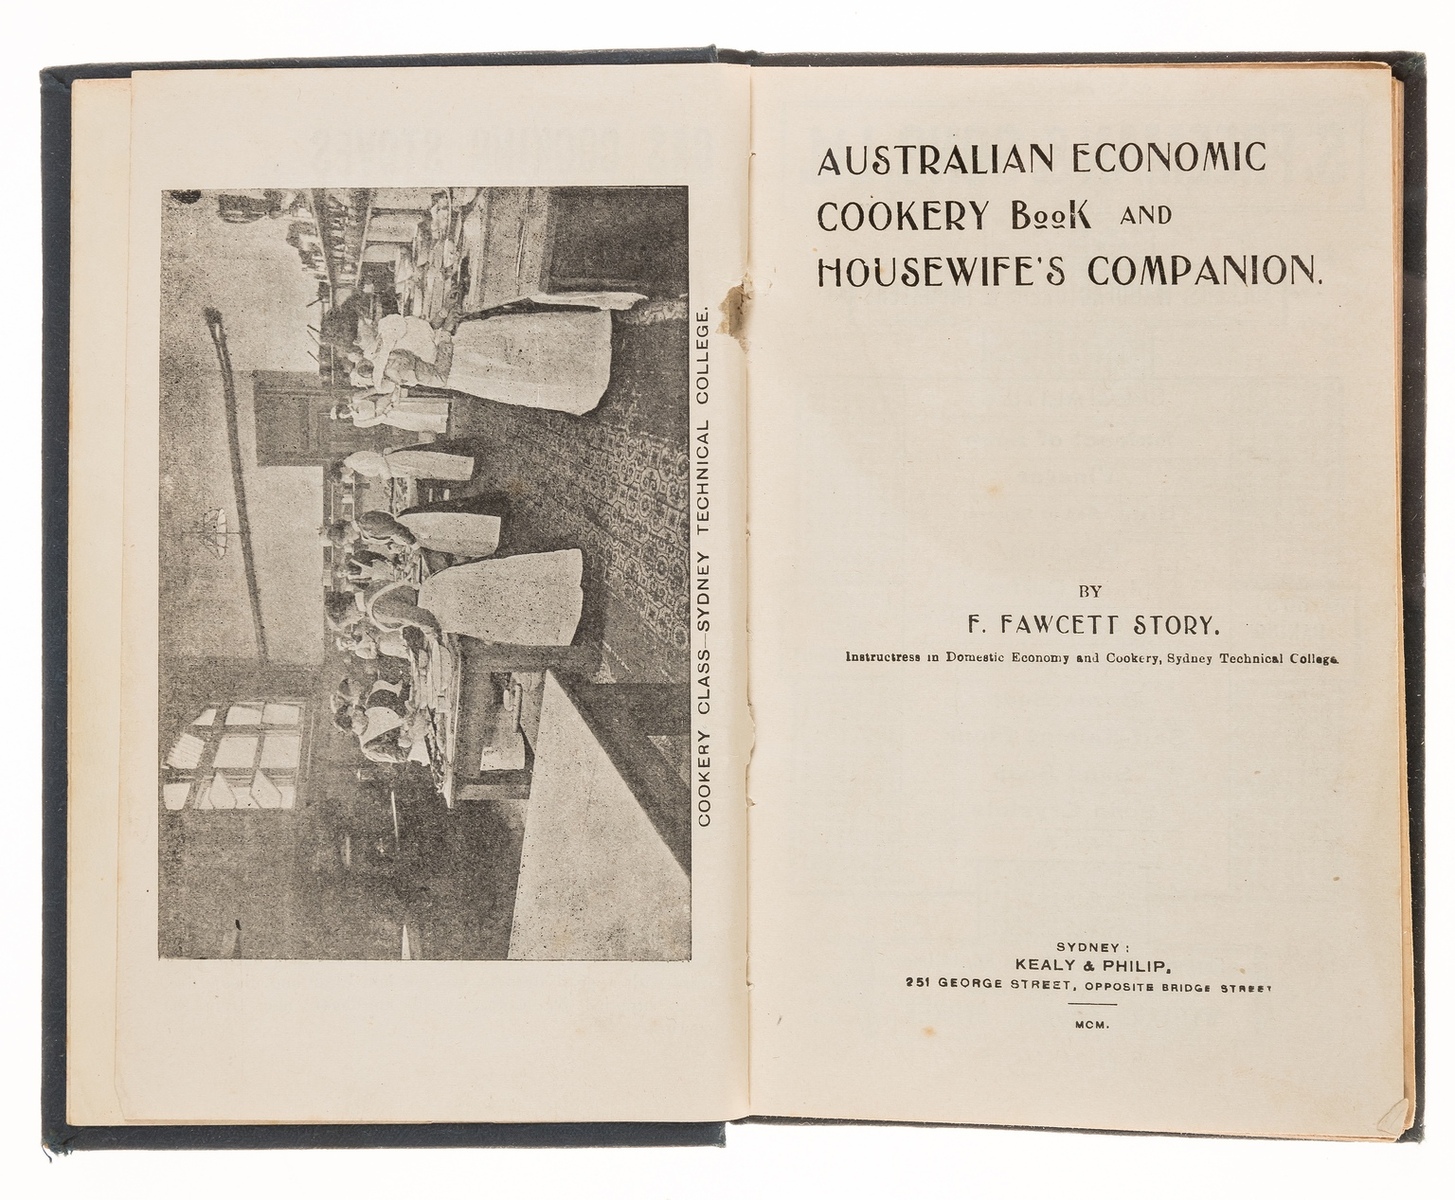 World.- Story (F. Fawcett) Australian Economic Cookery Book and Housewife's companion, Sydney, …